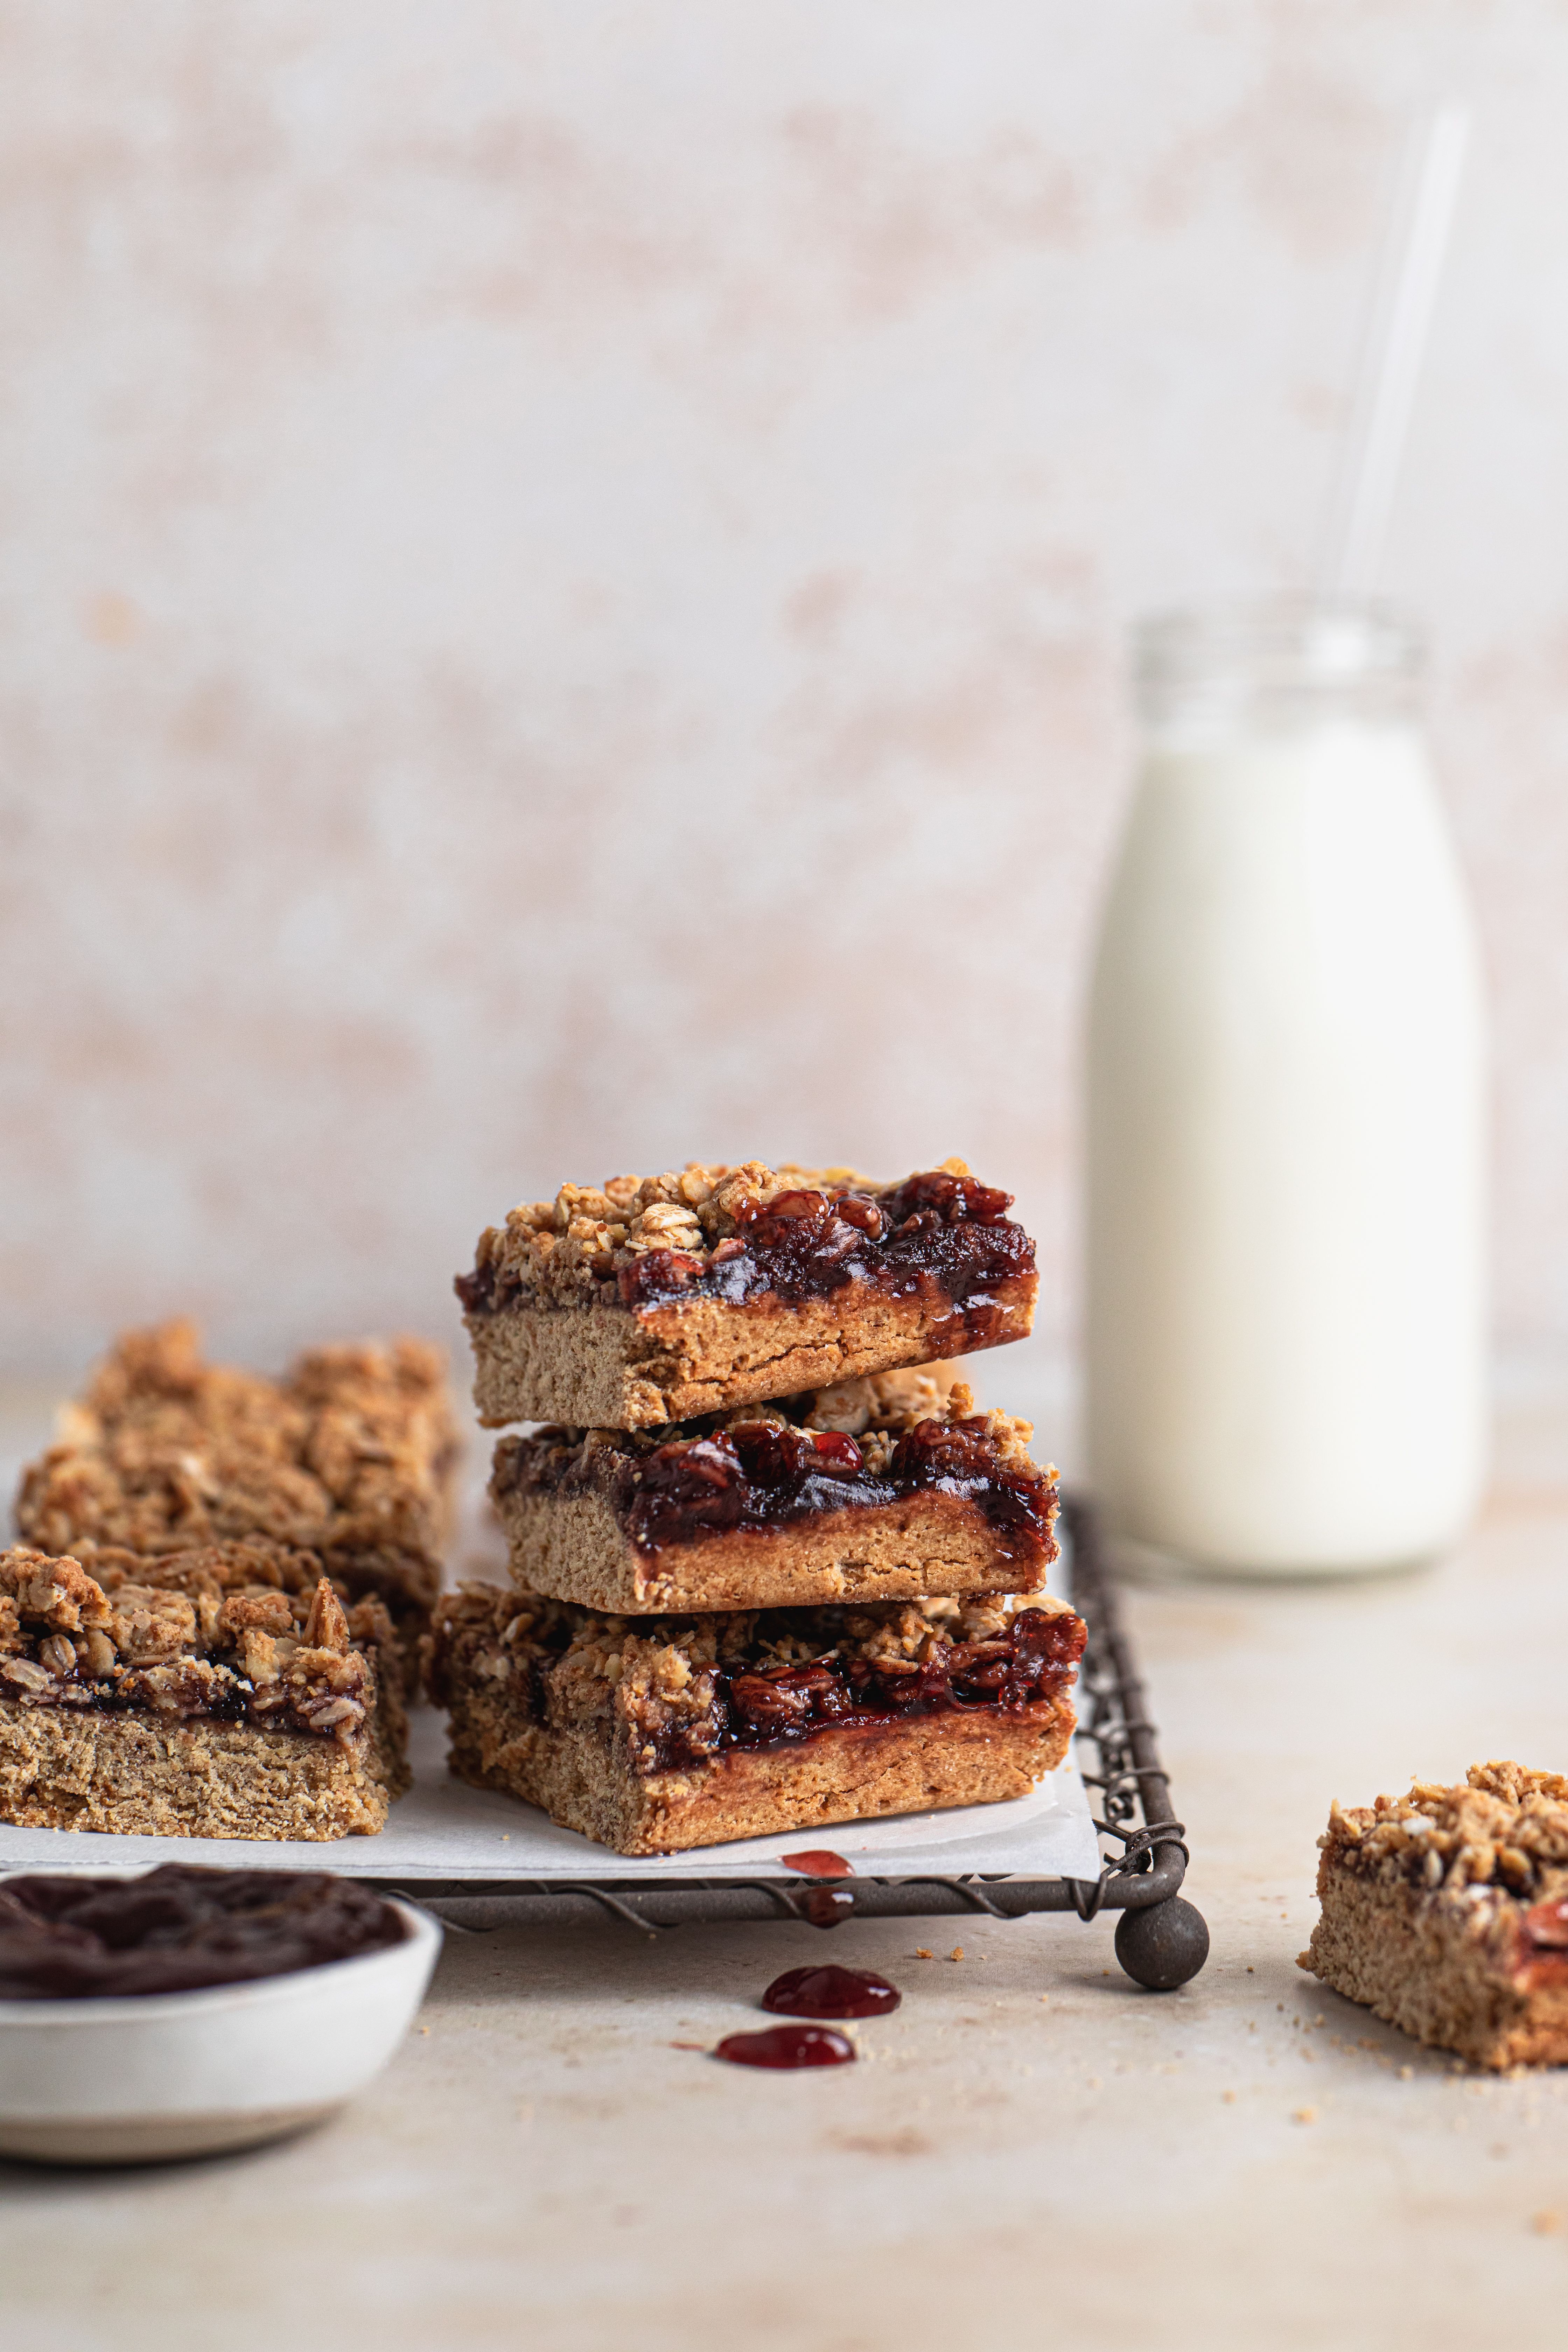 Plum crumble bar stack with jam oozing out.